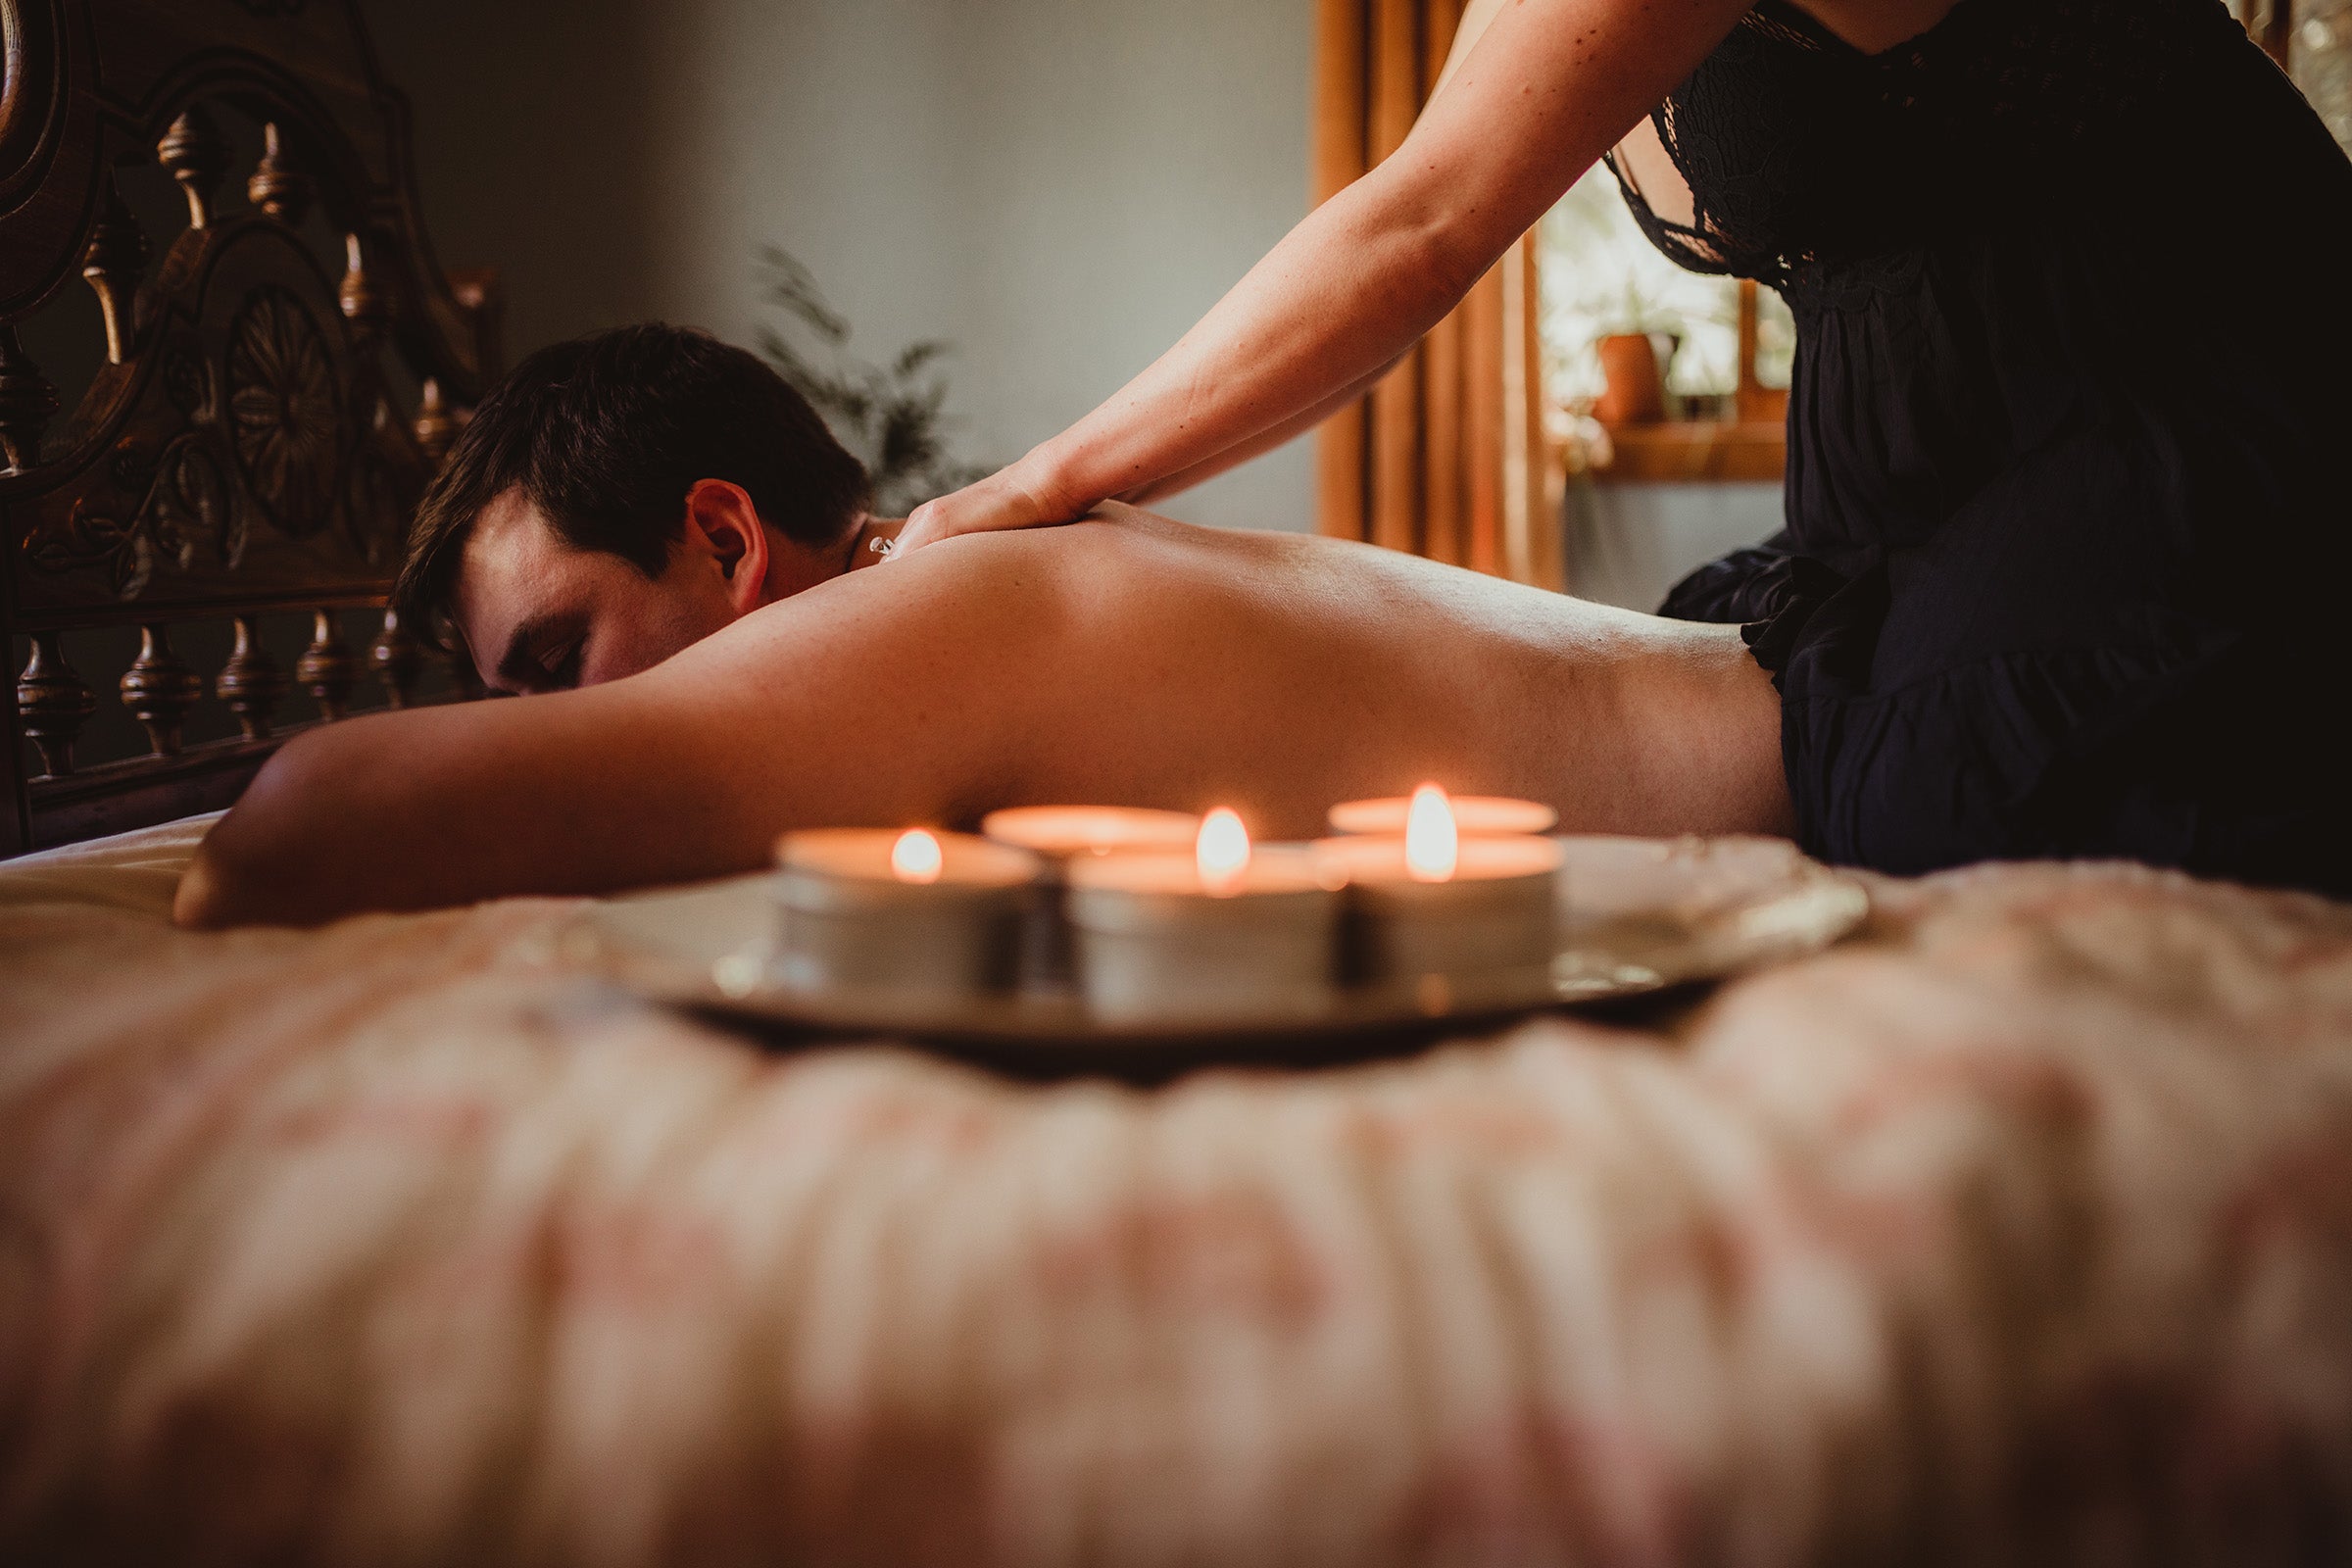 A man lays facedown on a bed as a woman massages him. In the foreground is a plate full of lit Skinny Dip Candles.